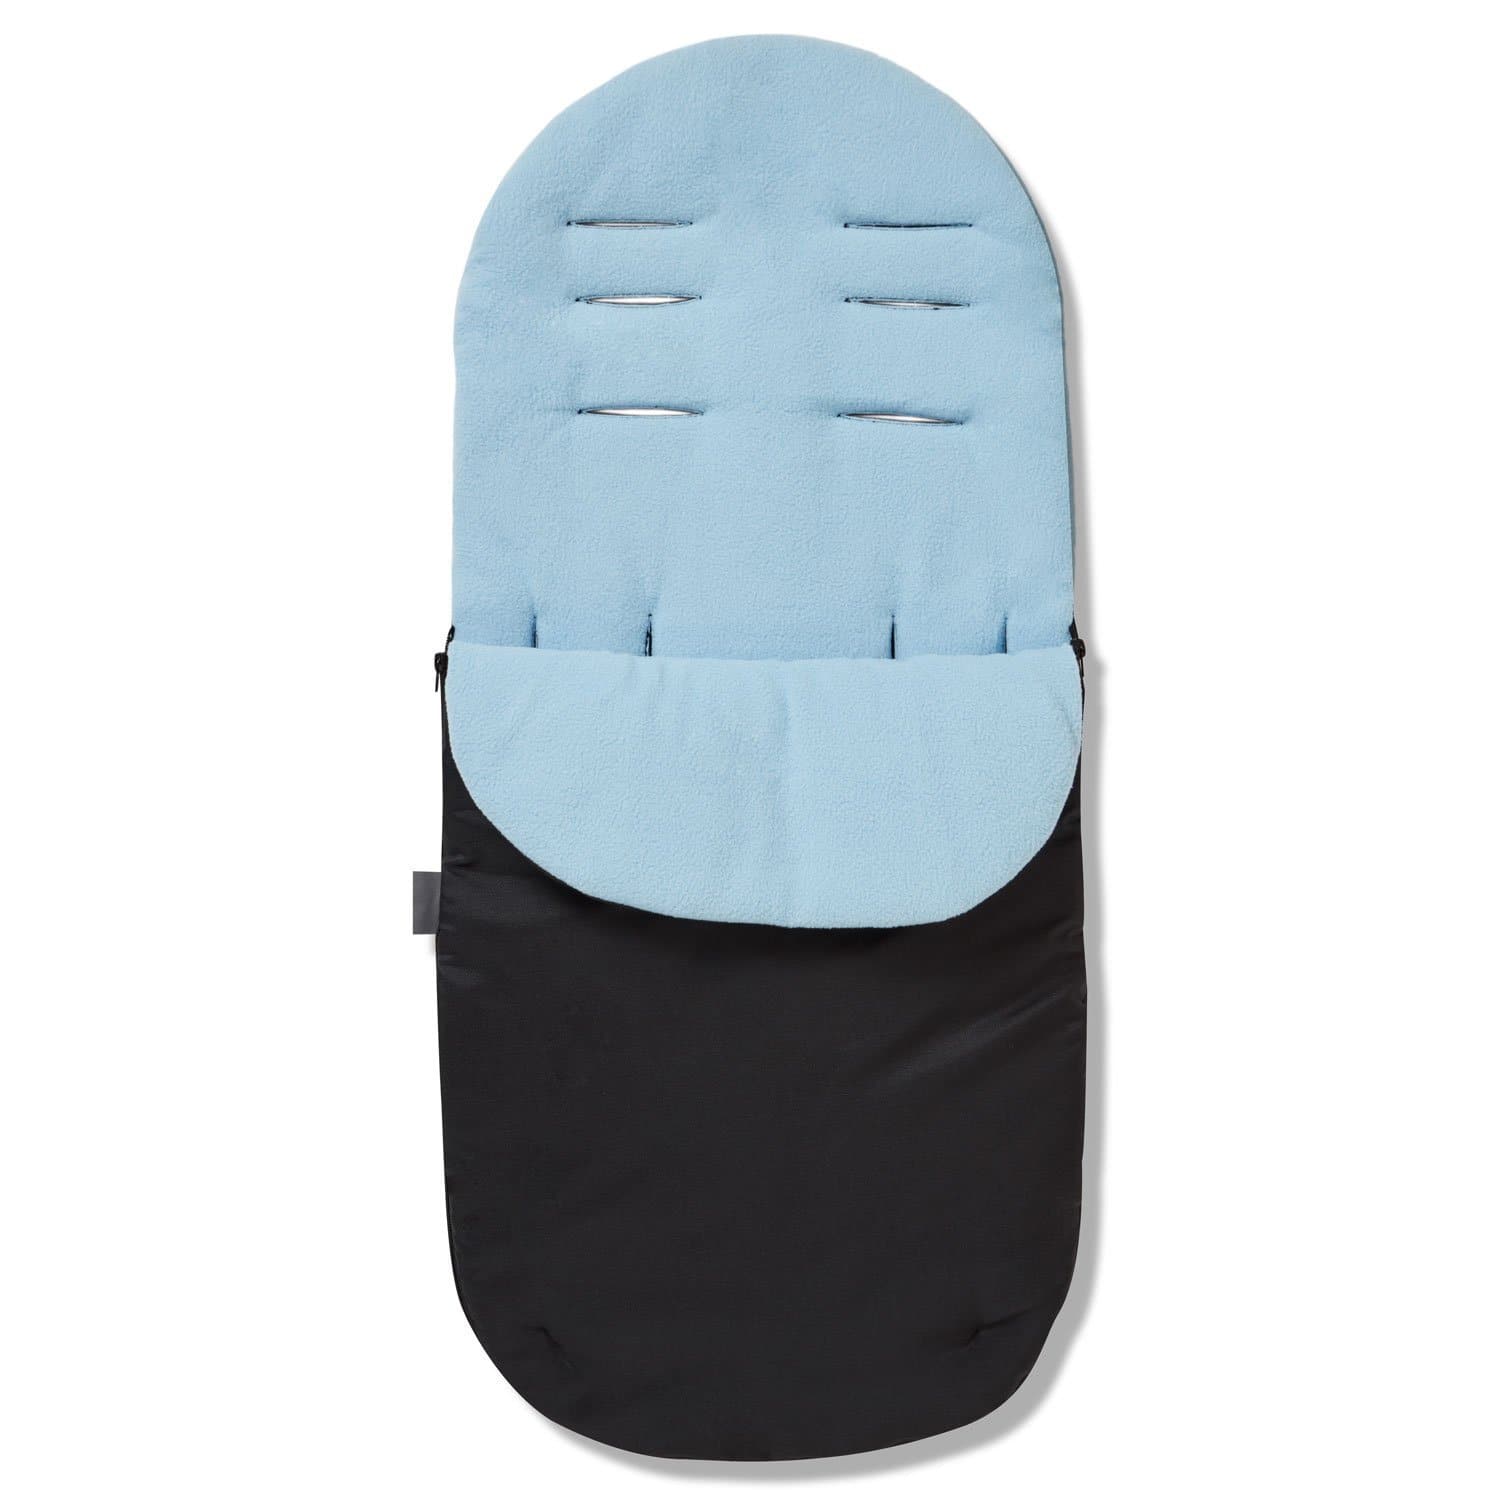 Footmuff / Cosy Toes Compatible with Maclaren - Light Blue / Fits All Models | For Your Little One